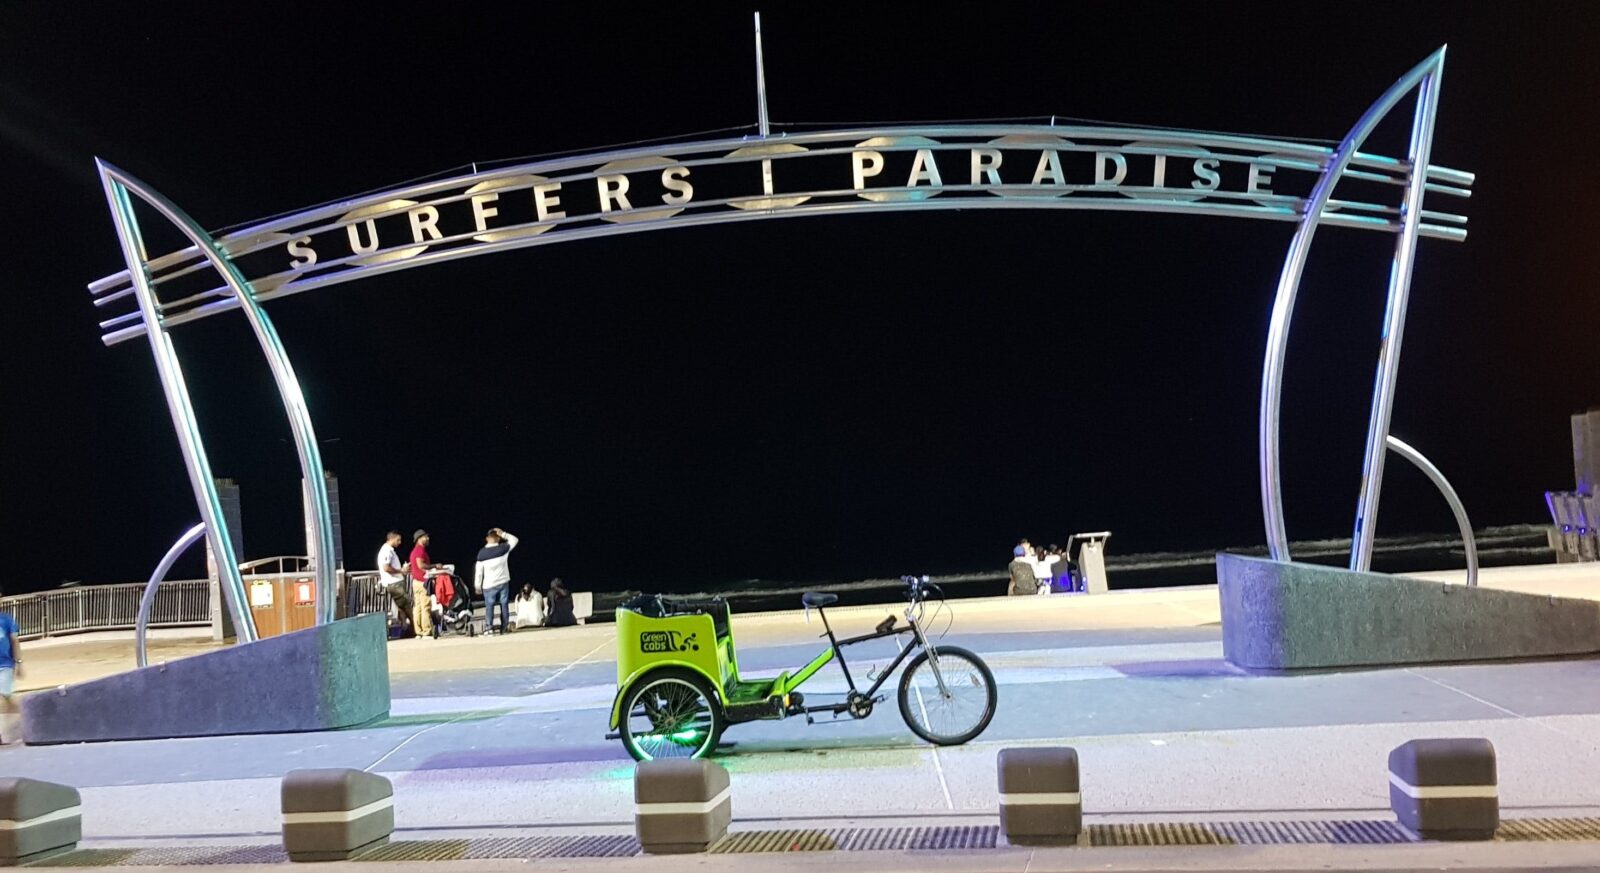 Green Cabs the best way to experience Surfers Paradise